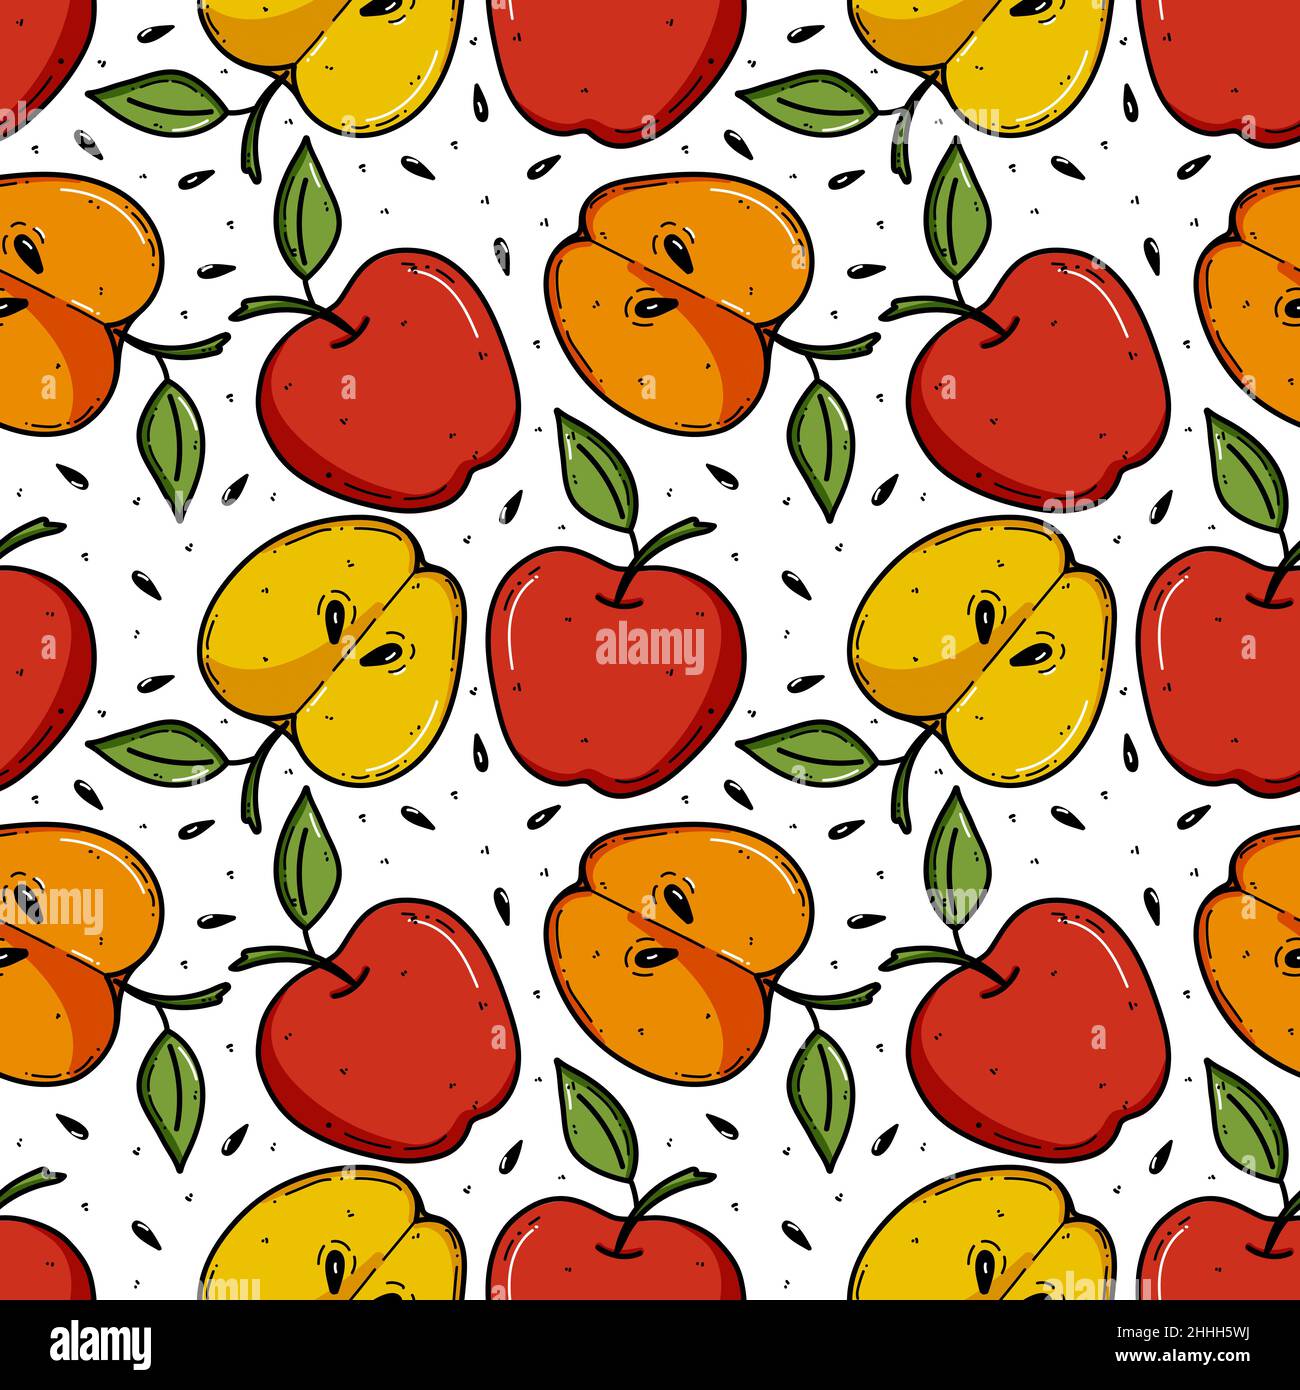 Apple background, seamless pattern vector illustration. Good for textile, wrapping, wallpapers, etc. Sweet red and yellow apples isolated on white background. Stock Vector